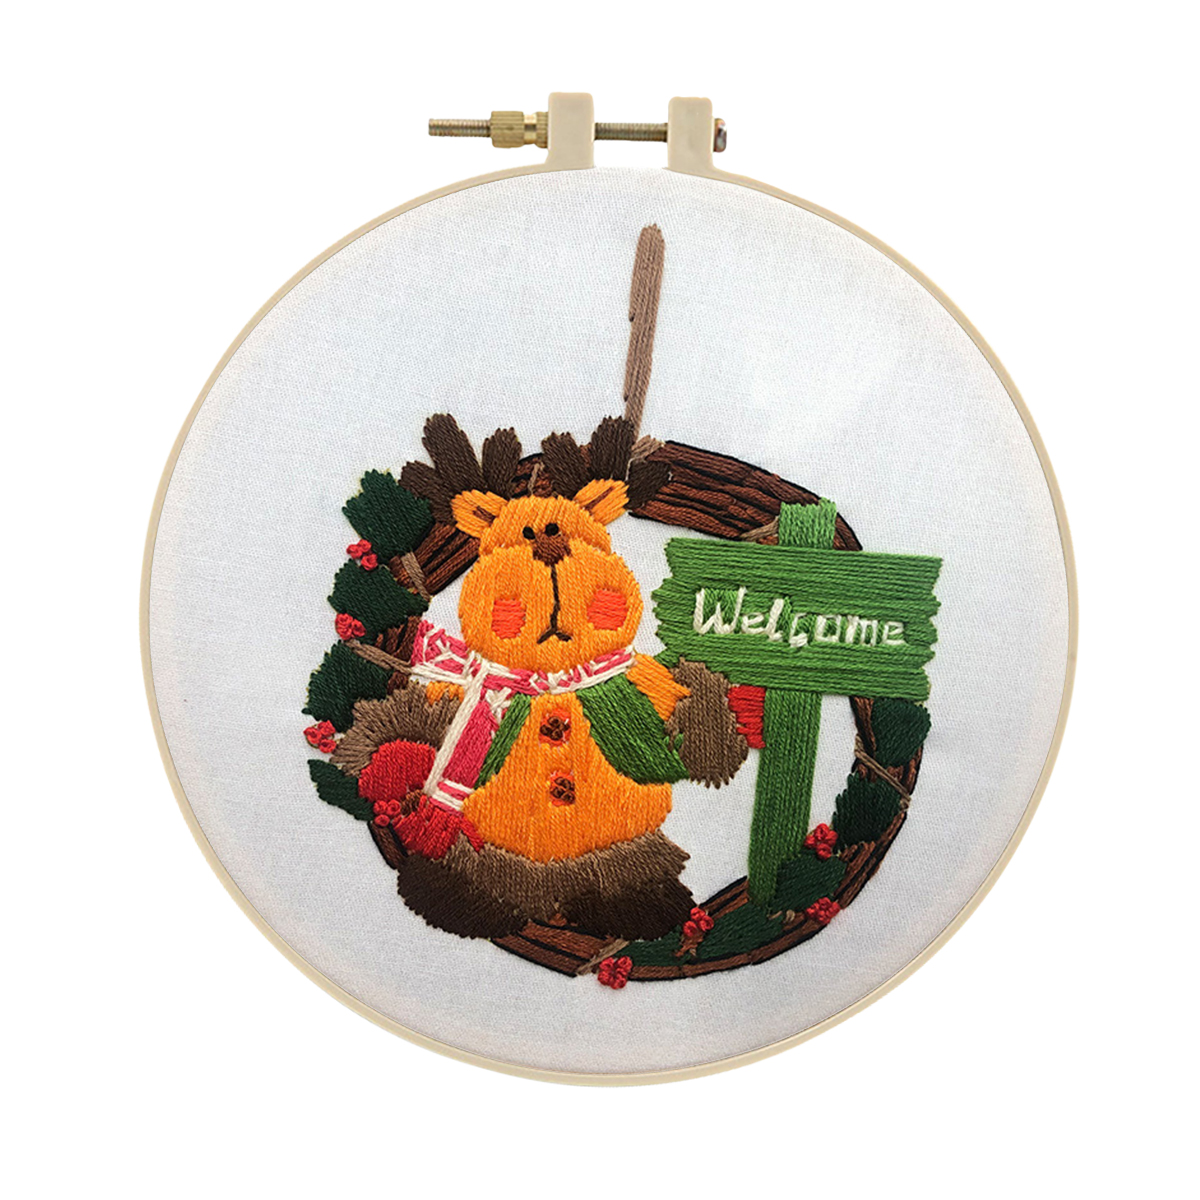 DIY Handmade Christmas Embroidery Kit Craft Cross Stitch Kits Beginner - Welcome Cubs Pattern